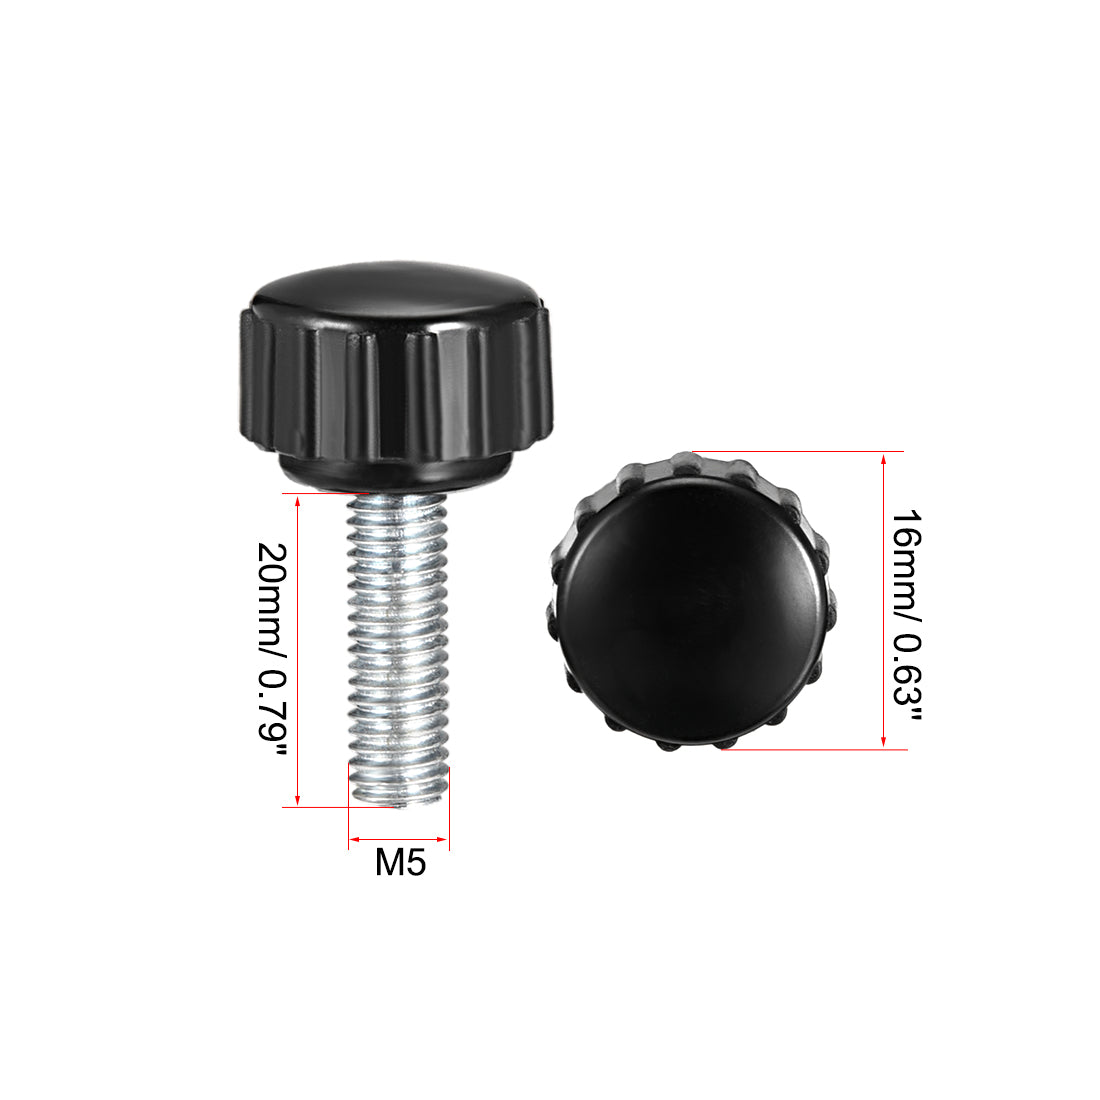 Uxcell Uxcell M5 x 15mm Male Thread Knurled Clamping Knobs Grip Thumb Screw on Type 15 Pcs